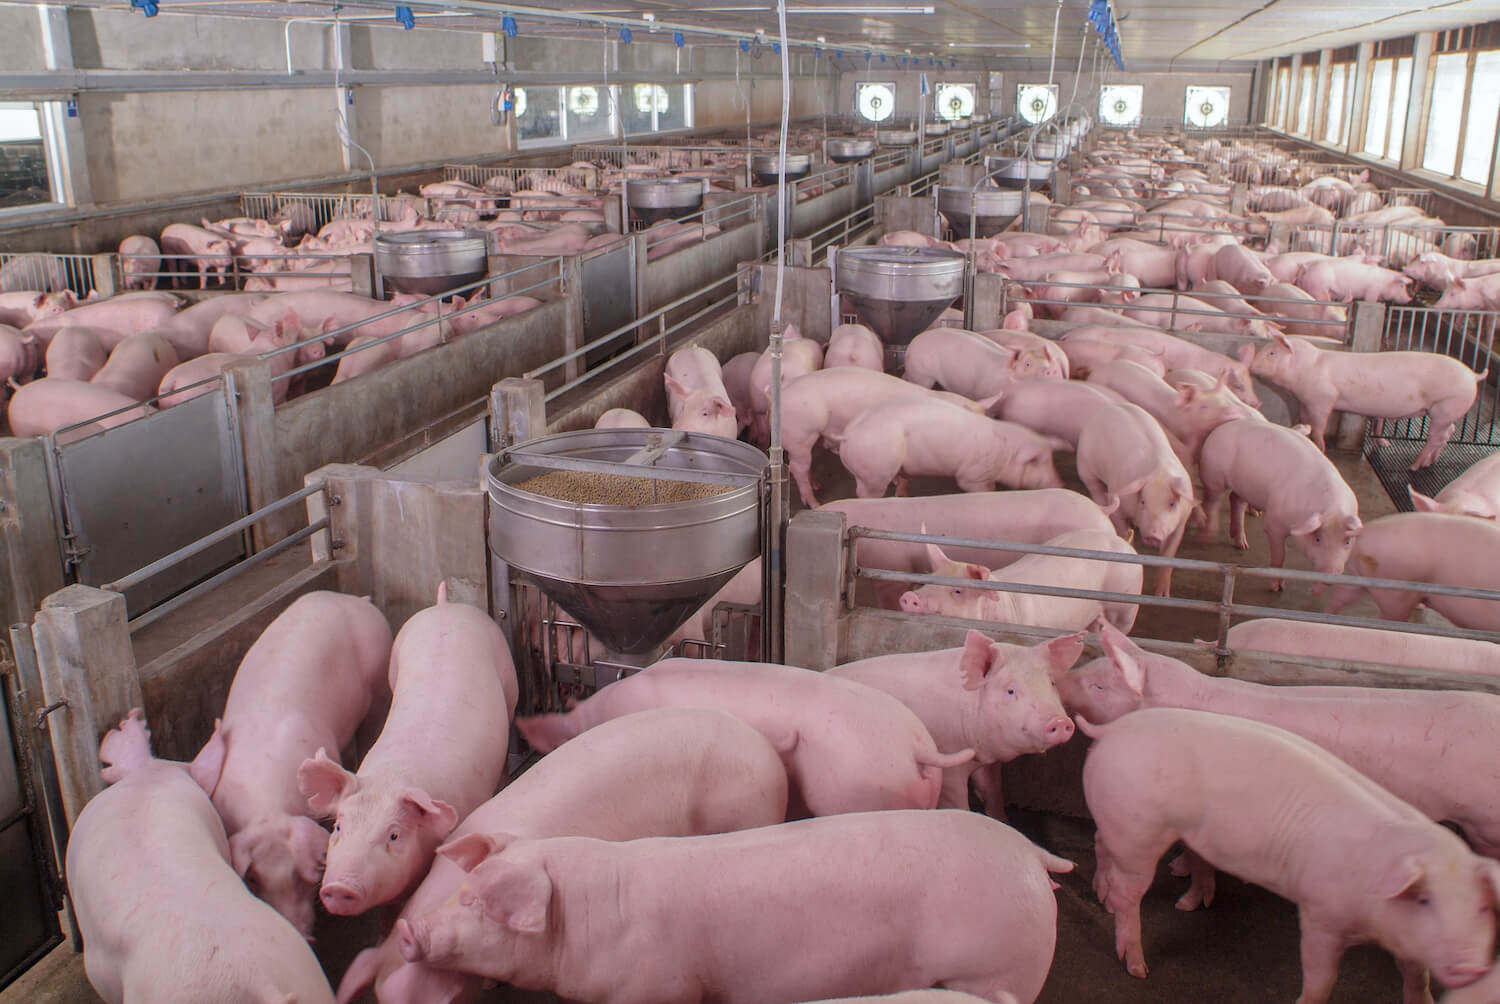 Room full of pigs eating from animal feeder. (May 2020)